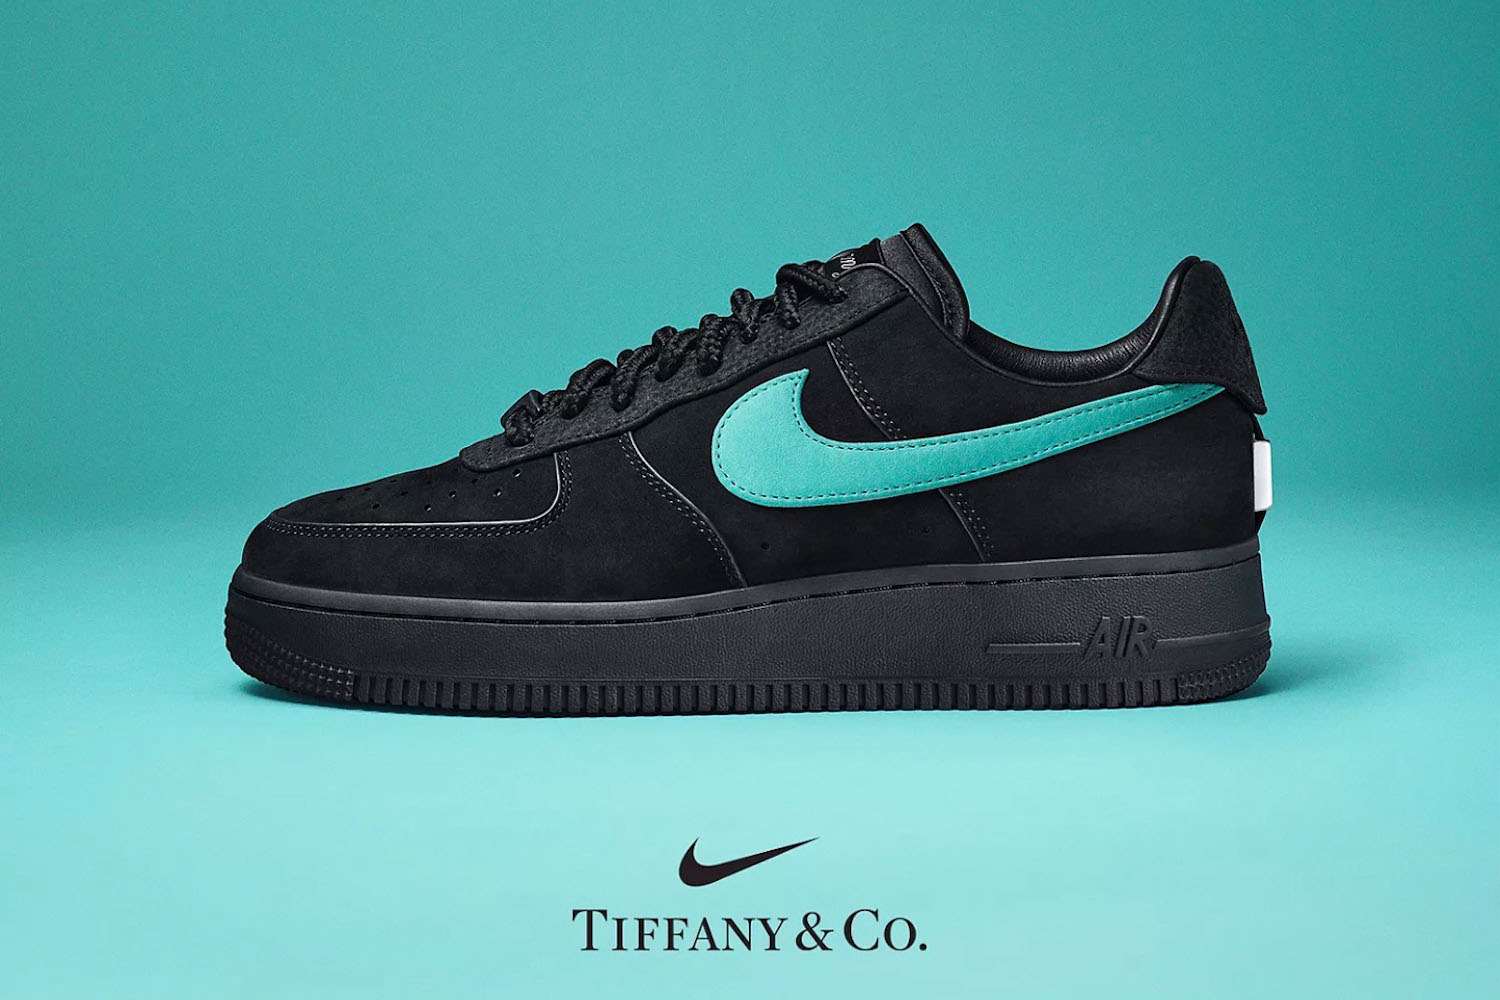 a pair of black Tiffany x Nike Air Force 1 on a light blue background